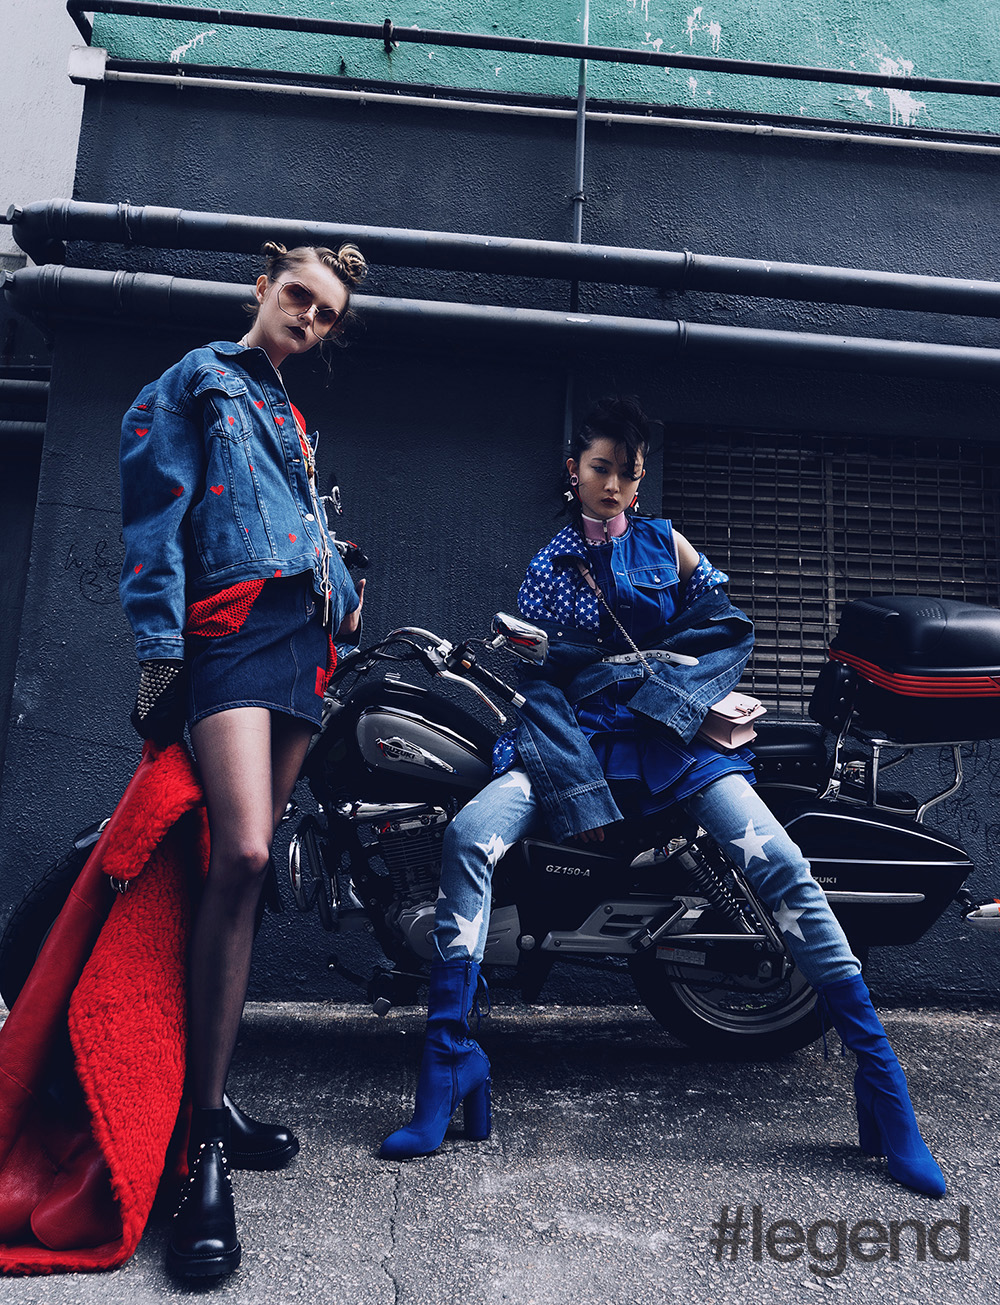 (From left) Natalia: shirt by Gucci, denim jacket by Lazy Oaf, available at Kapok, shearling coat by Whistles, available at Rue Madame, skirt by Calvin Klein, boots by Jimmy Choo. sunglasses by Chloé, necklace by Chanel, gloves are stylist’s own; Zuo Ye: knit dress, earrings and belt by Miu Miu, sleeveless dress and windbreaker by Givenchy, jacket by Whistles, available at Rue Madame, jeans by Stella McCartney, available at Net-a-Porter, boots by Givenchy and bag by Salvatore Ferragamo